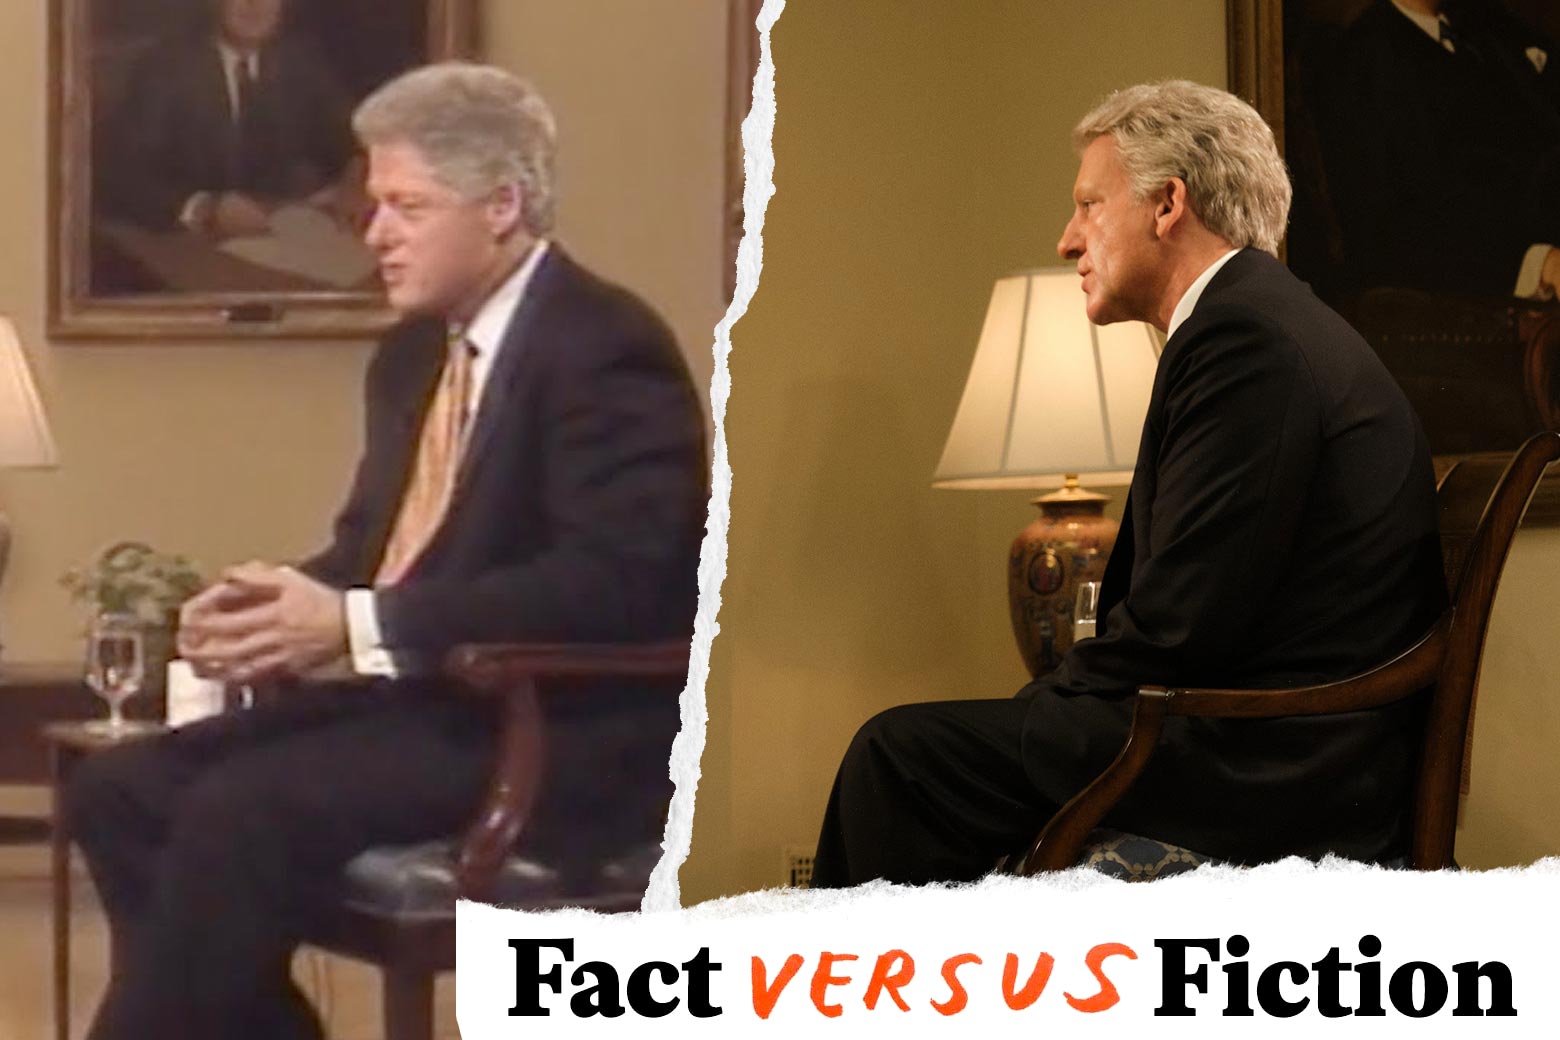 Bill Clinton, and Clive Owen as Bill Clinton in Impeachment: American Crime Story, with the Fact Versus Fiction logo